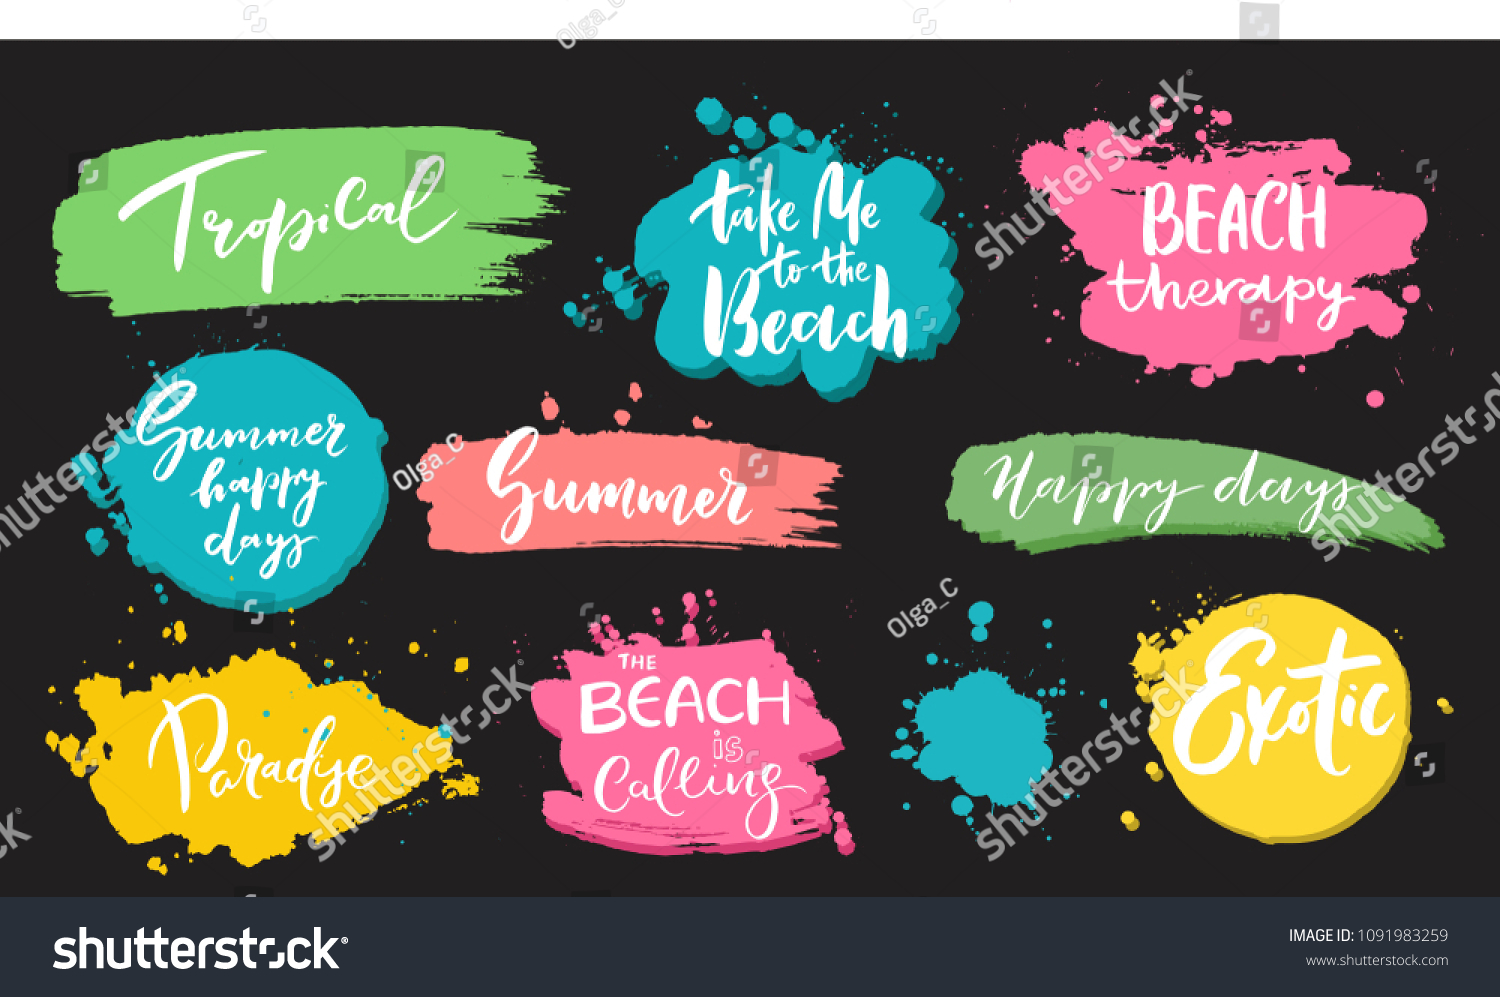 	
Set of universal hand drawn paint background. Summer quotes. Speech bubble. Dirty artistic design elements, boxes, frames for text. #1091983259